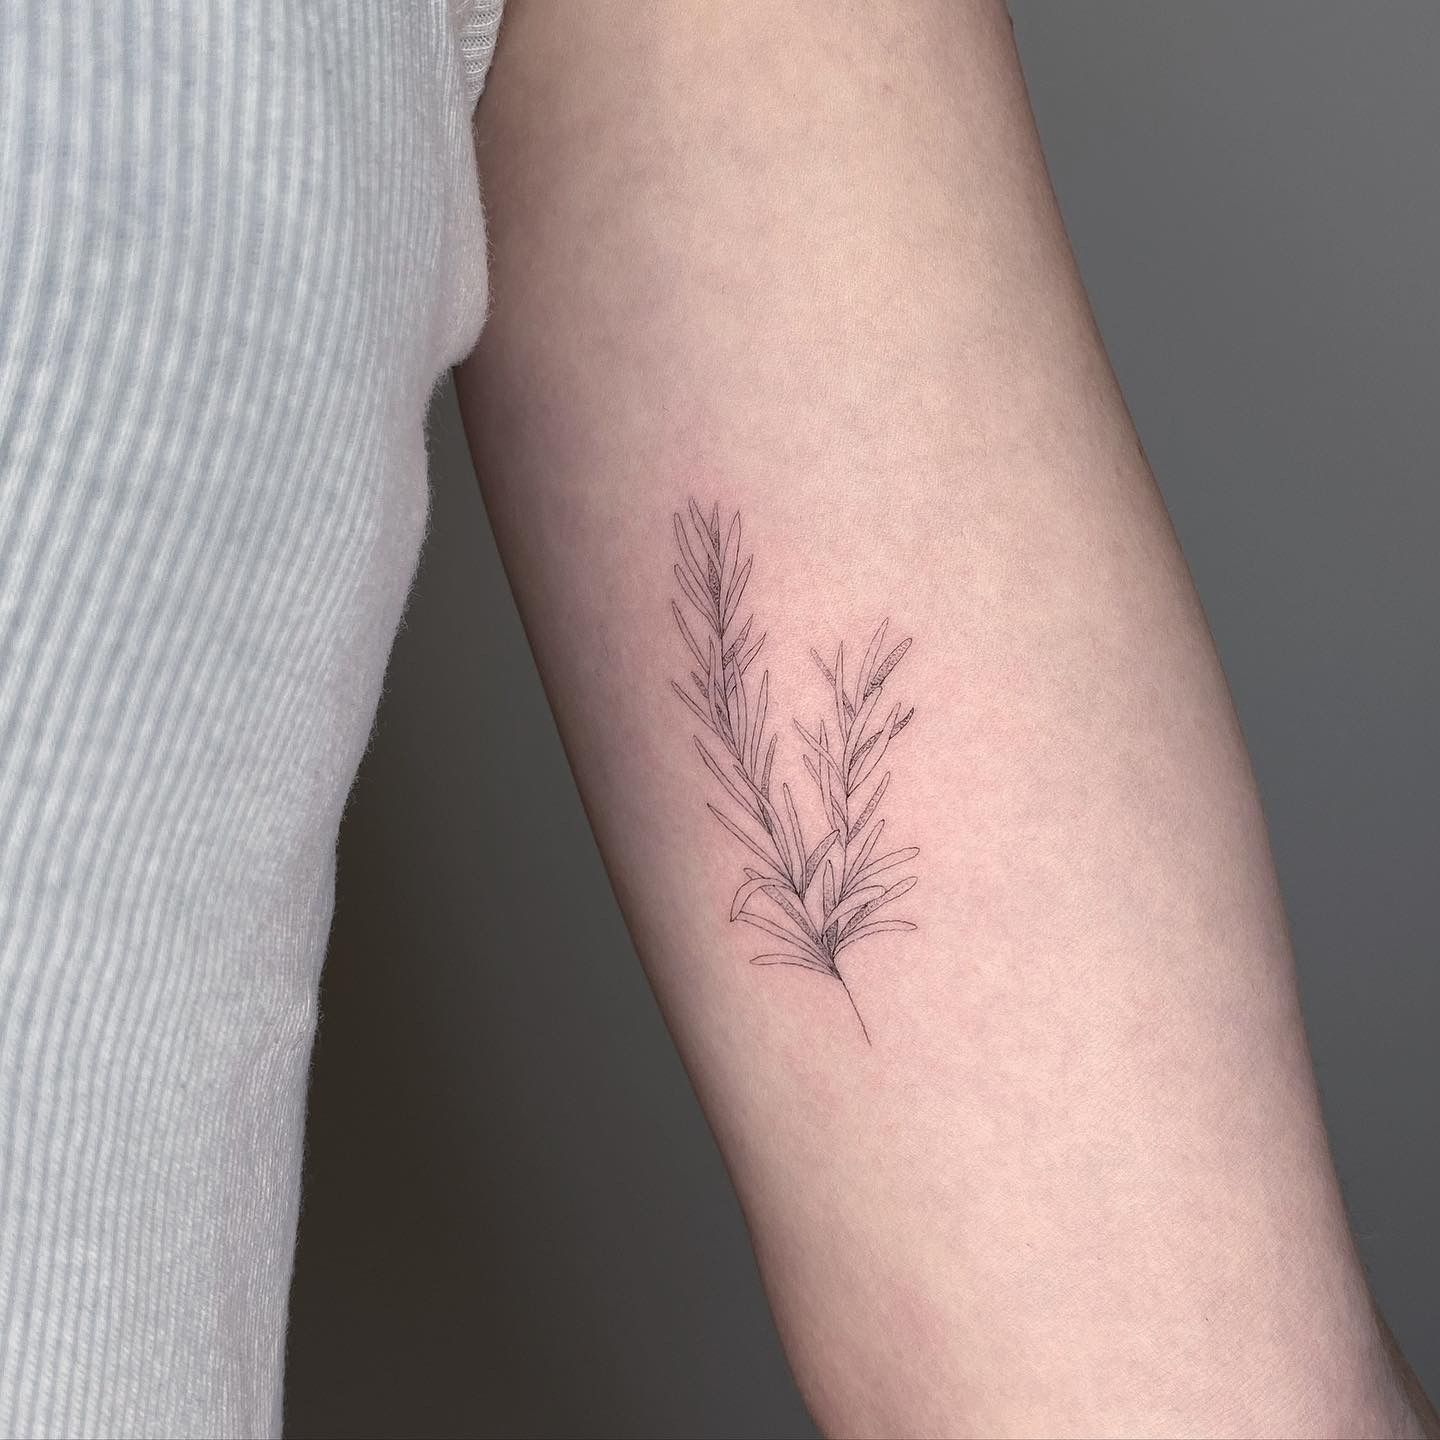 gristletattoo on Tumblr: Rosemary by @fantattoo531! Fan will be @blkserum  in San Francisco at the end of April! Email fantattoo531@gmail.com to  schedule...